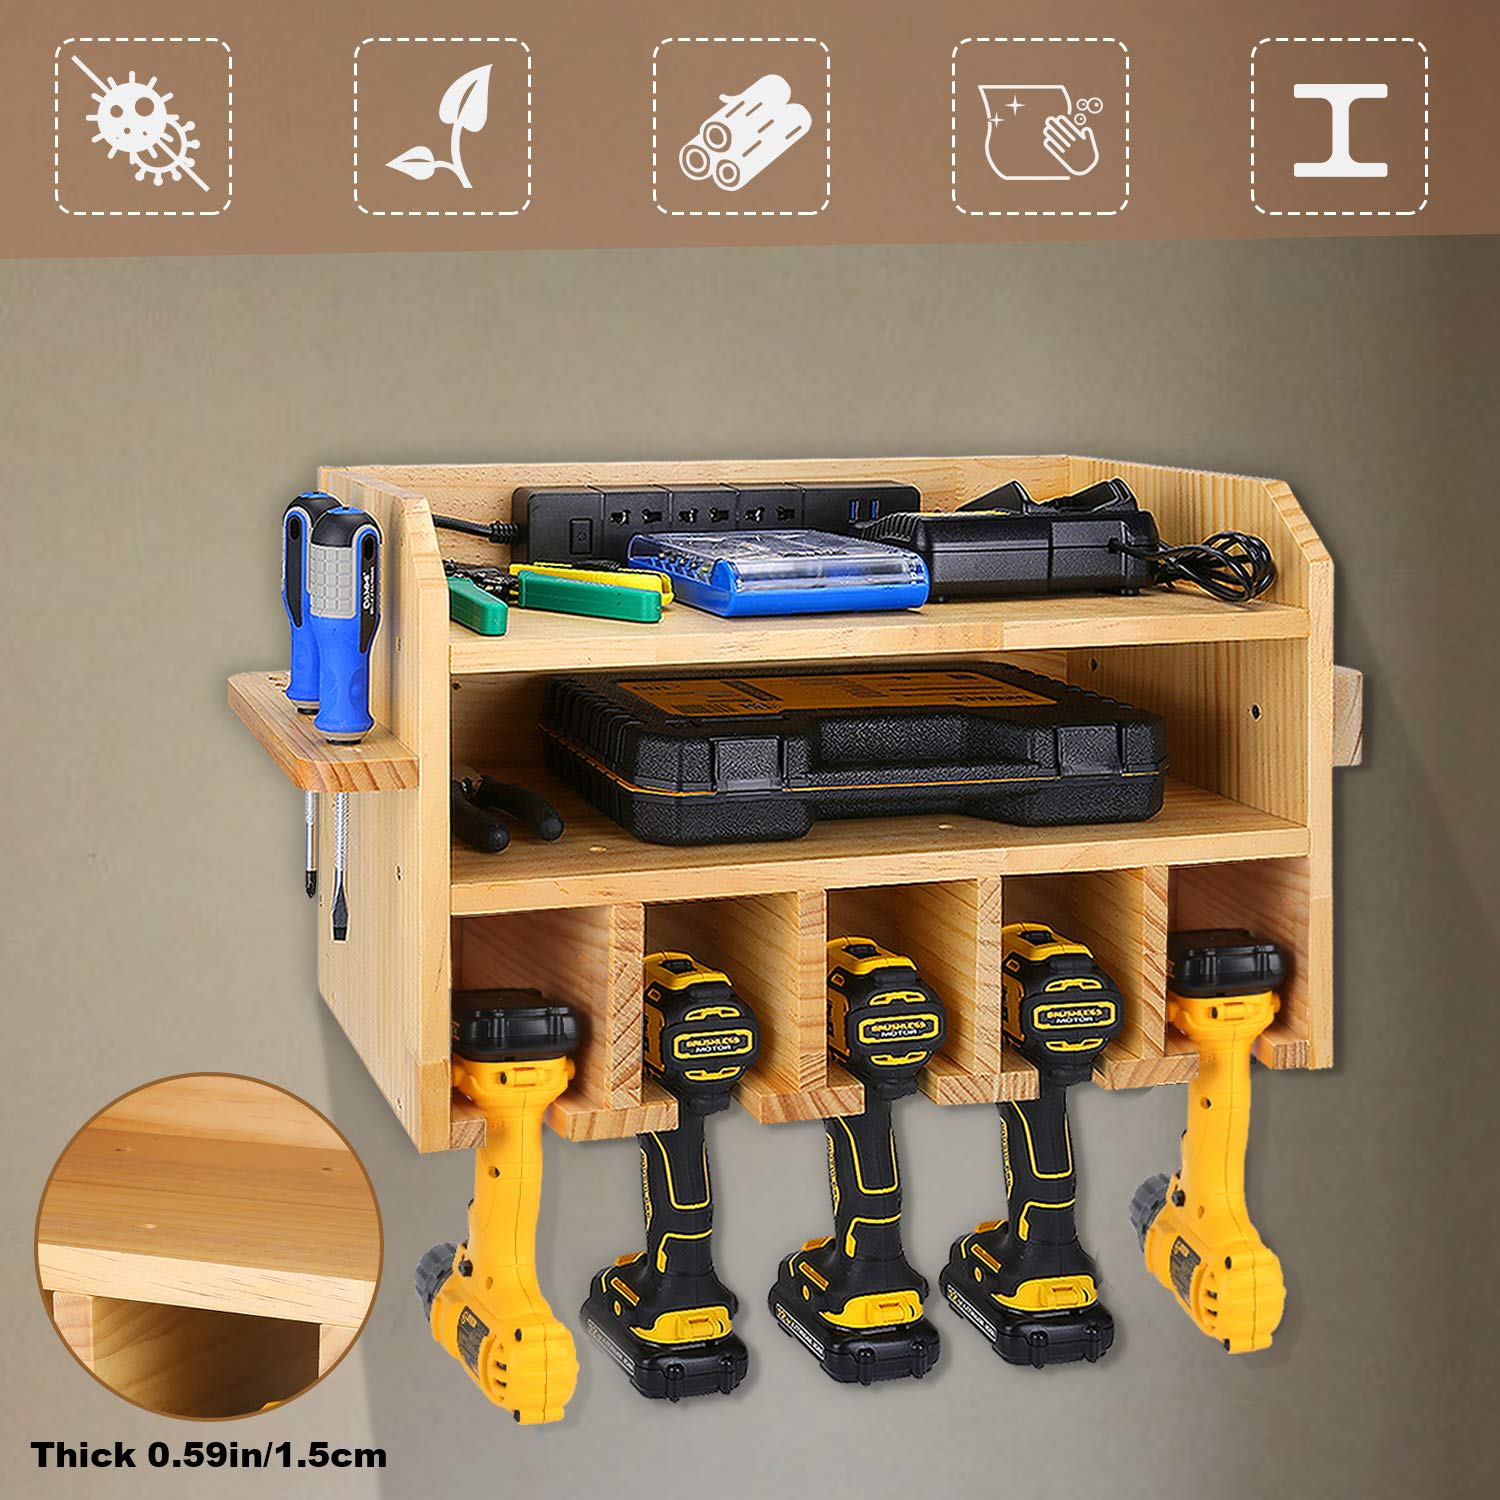 Power Tool Storage, Power Tools Organizer, Cordless Drill Charging Station Wall Mount Five Drill Holder with Screwdriver Rack and Drill Bit Rack Garage Storage Tool Organizer